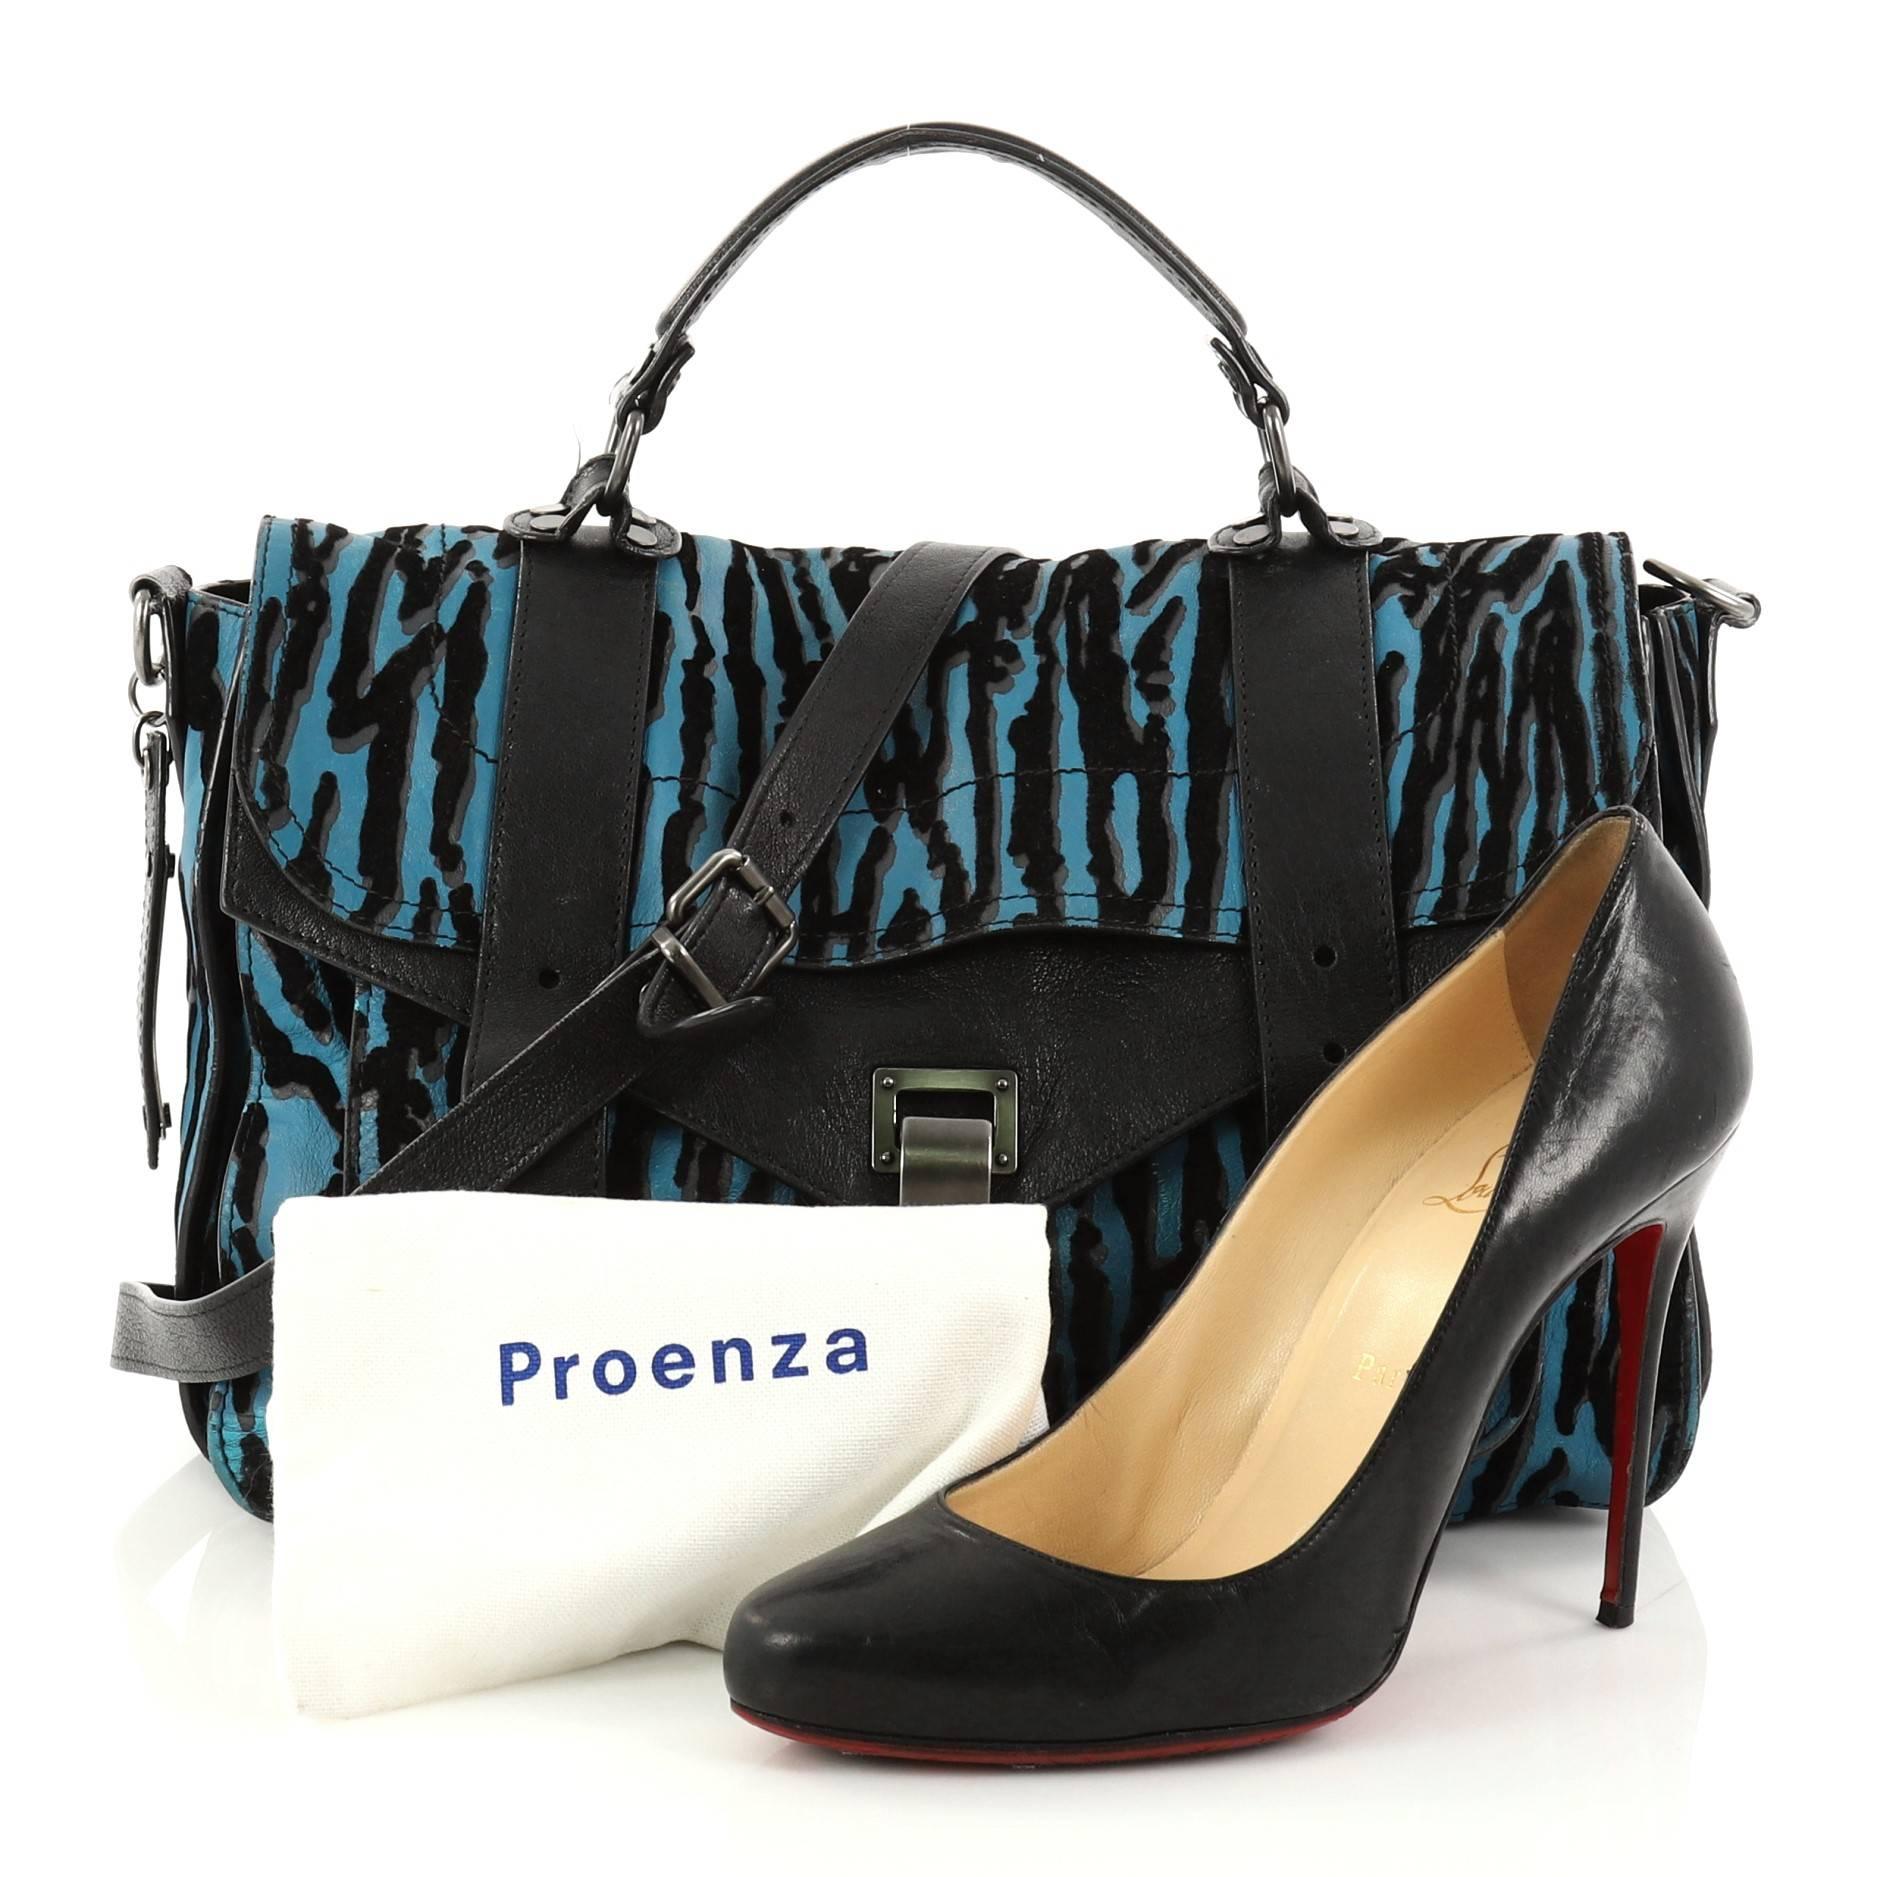 This authentic Proenza Schouler PS1 Satchel Printed Leather Medium is the ideal way to travel with style and functionality. Constructed from black and blue zebra printed leather, this stylish print PS1 satchel is accented with gunmetal-tone